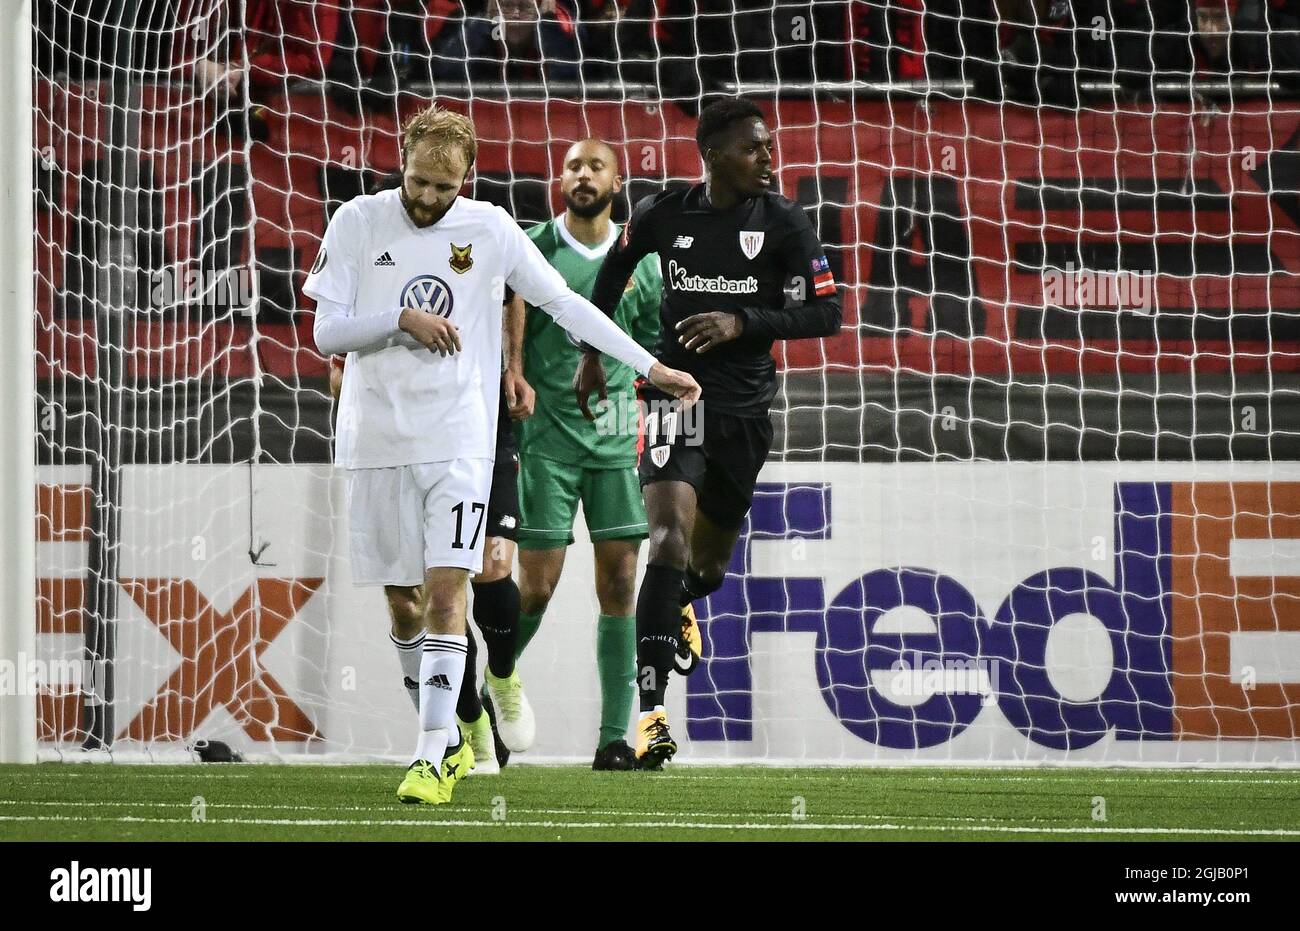 Athletic's Inaki Williams (R) celebrates scoring the 2-2 goal as Ostersund's Curits Edwards (L) and goalkeeper Aly Keita look on during the UEFA Europa League group J soccer match between Ostersunds FK and Athletic Bilbao at Jamtkraft Arena in Skelleftea, Sweden, on Oct. 19, 2017. Photo: Robert Henriksson / TT / code 11393  Stock Photo